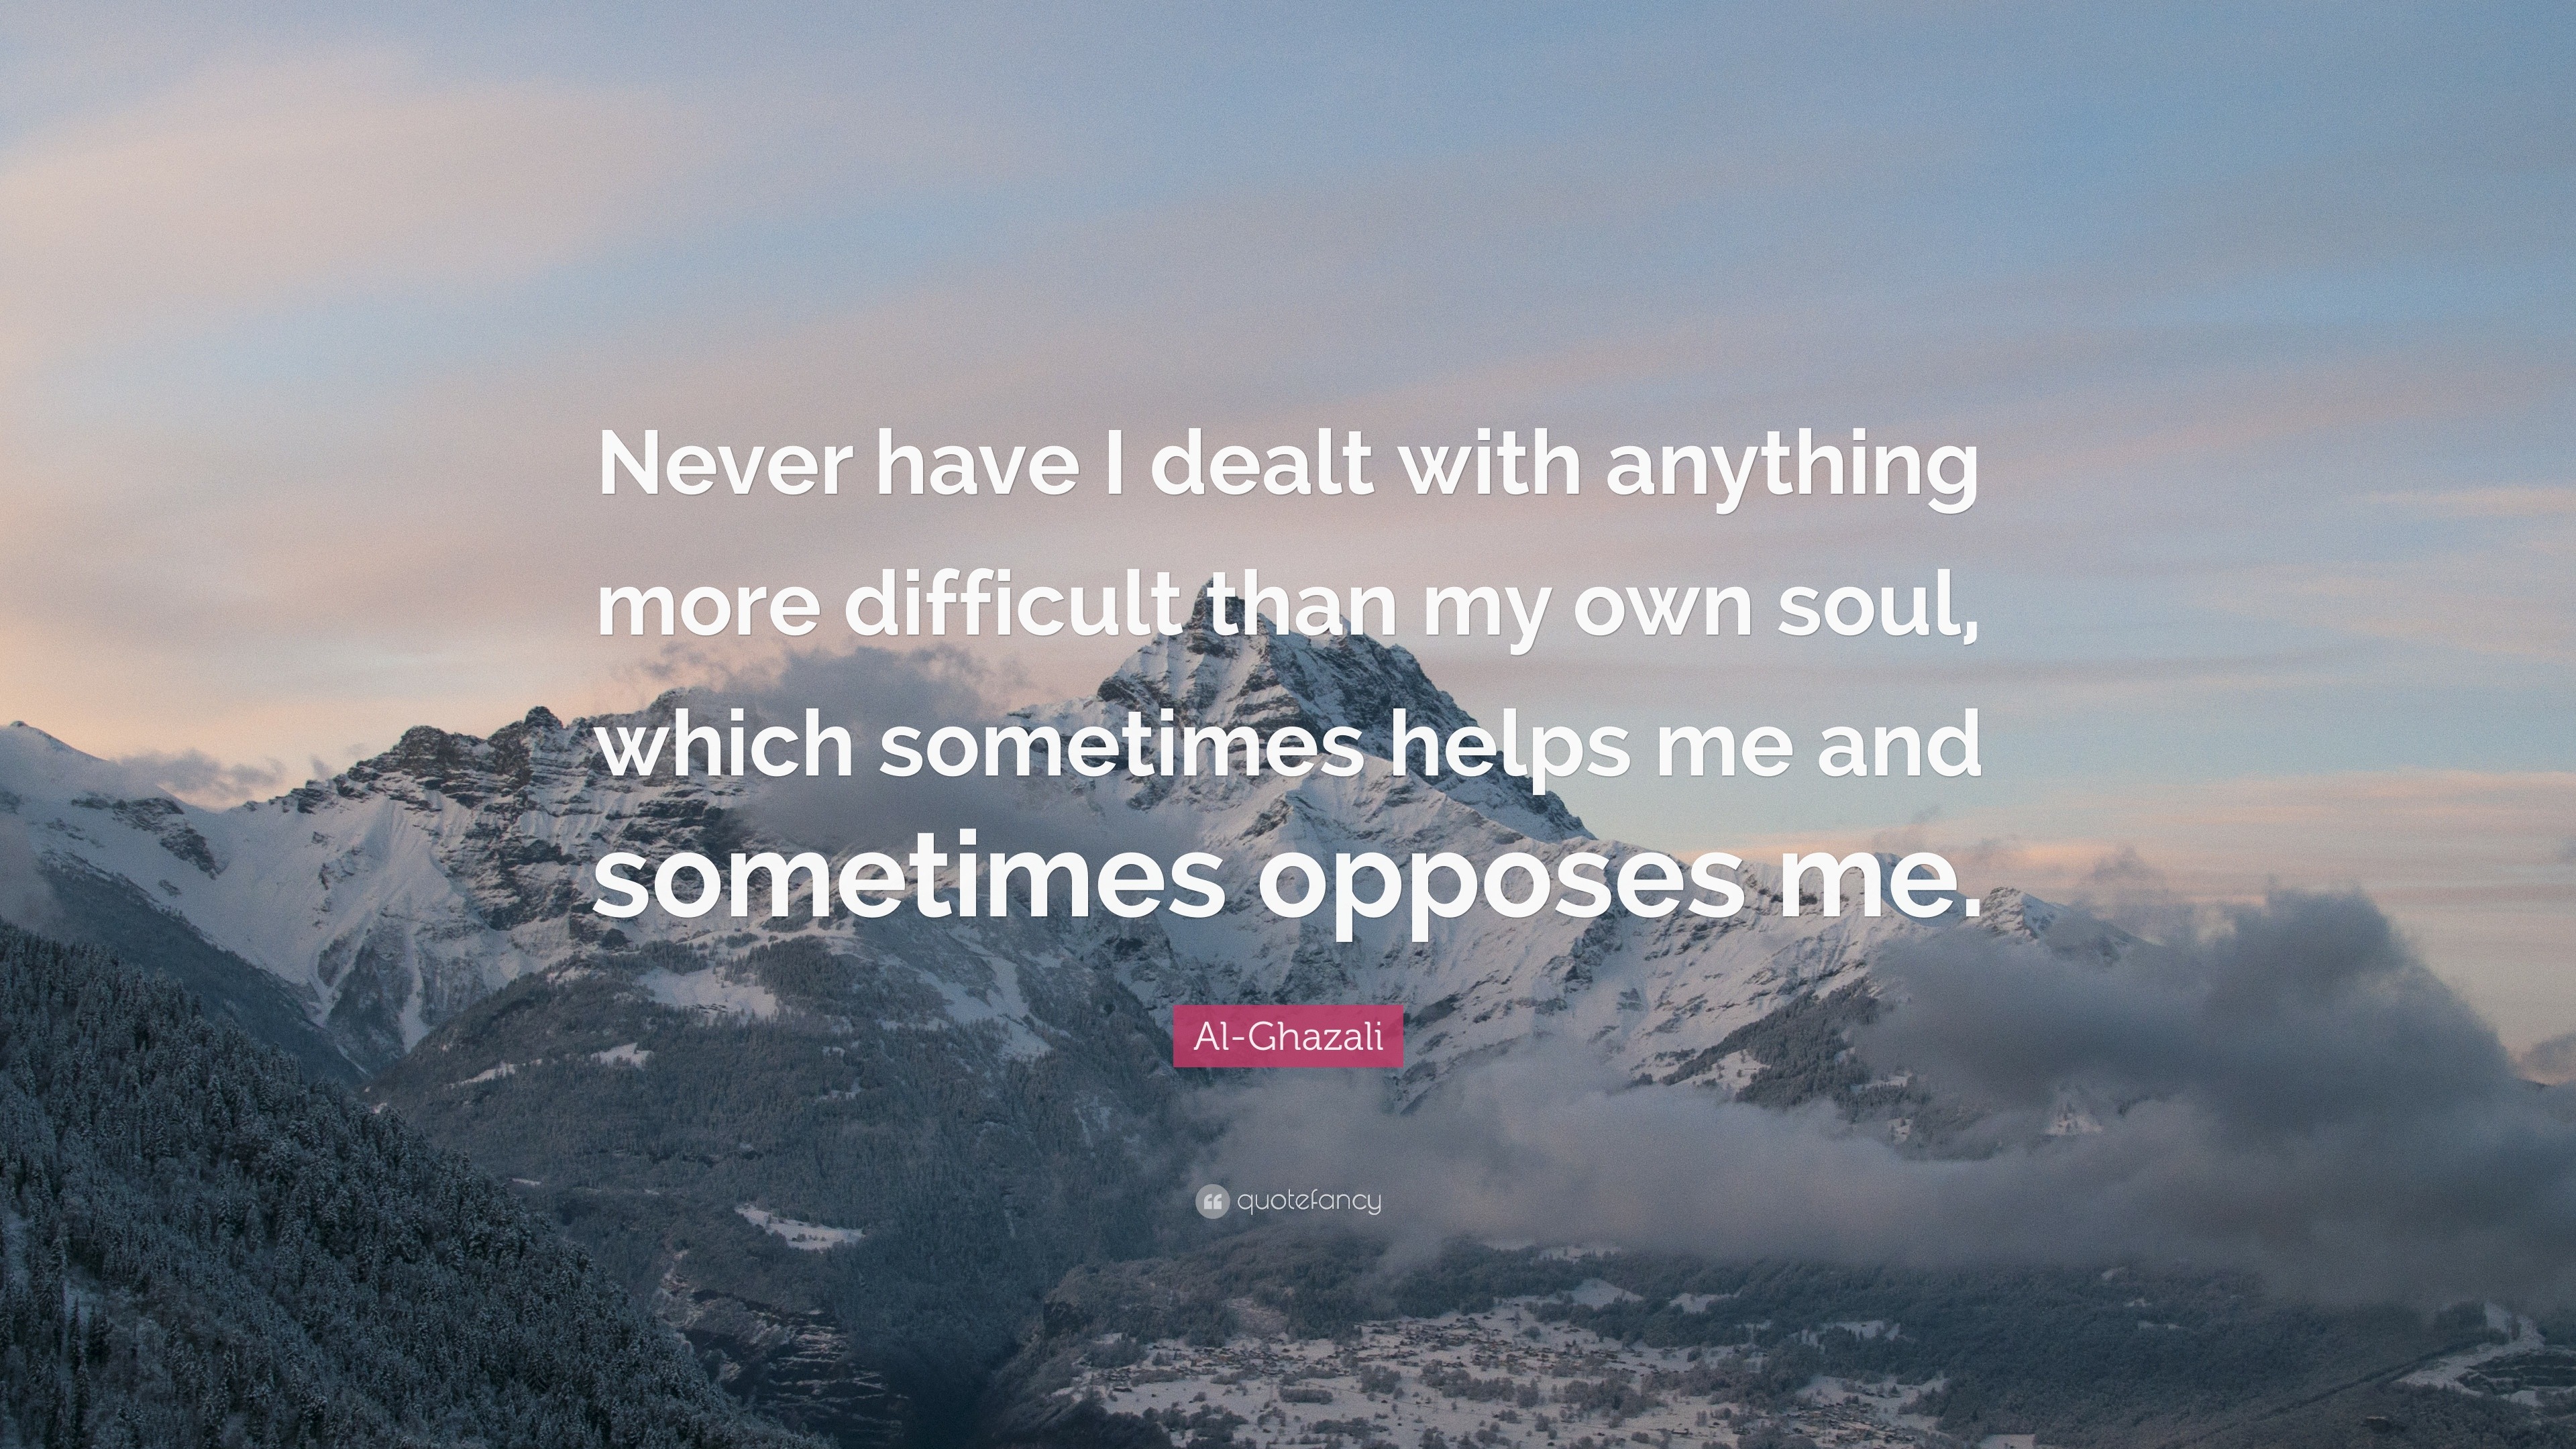 Al-Ghazali Quote: “Never have I dealt with anything more difficult than ...